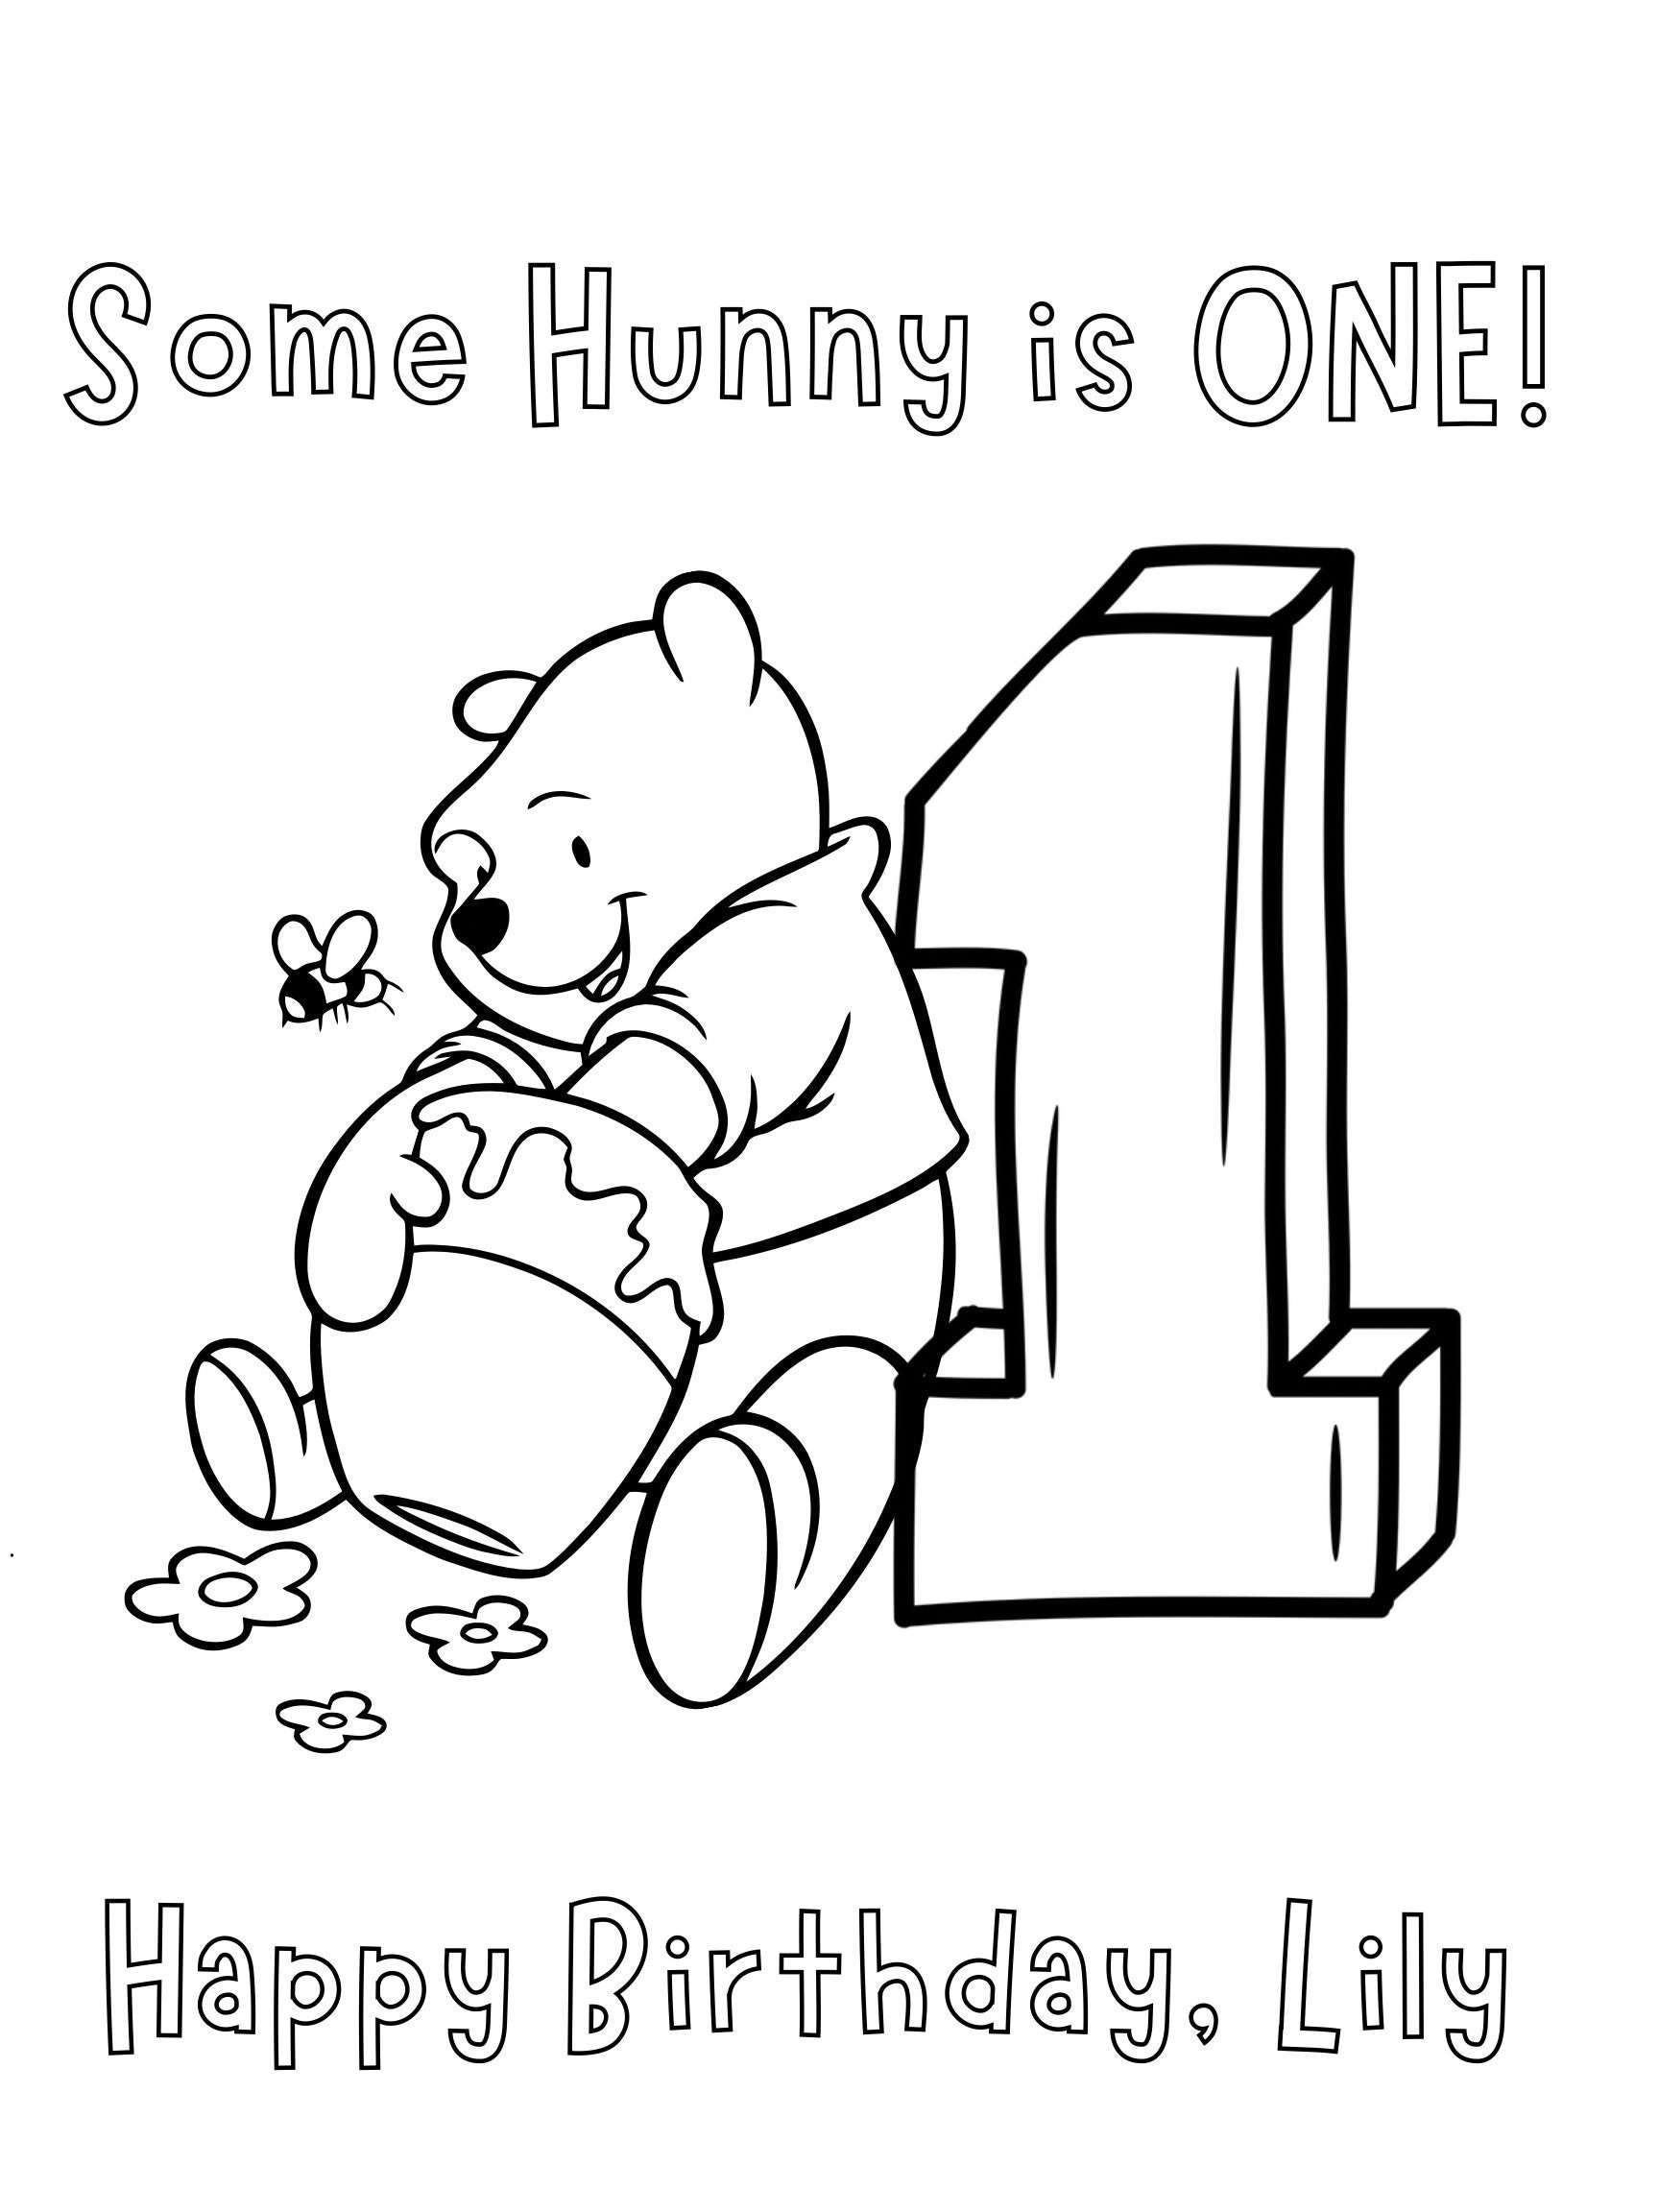 Winnie the pooh first birthday coloring sheet digital download